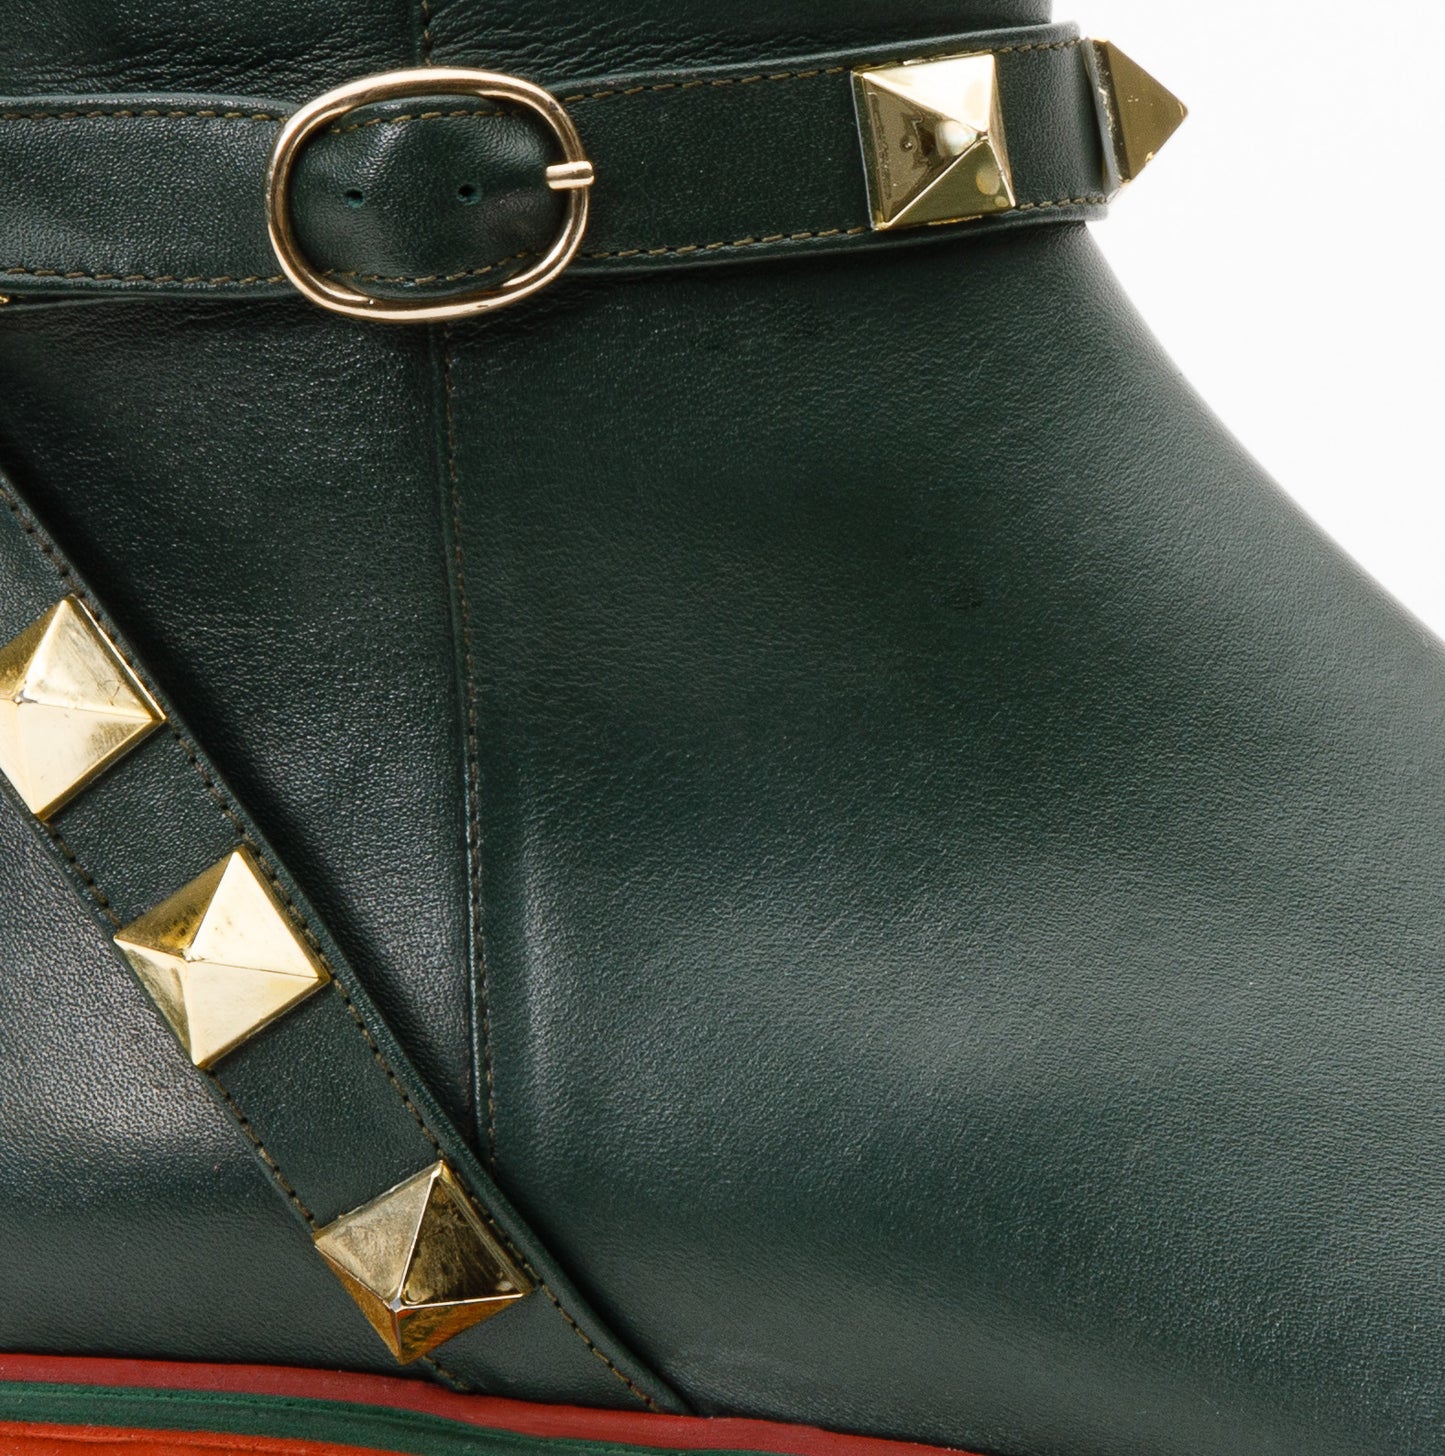 The Prag Green Leather Ankle Women Boot